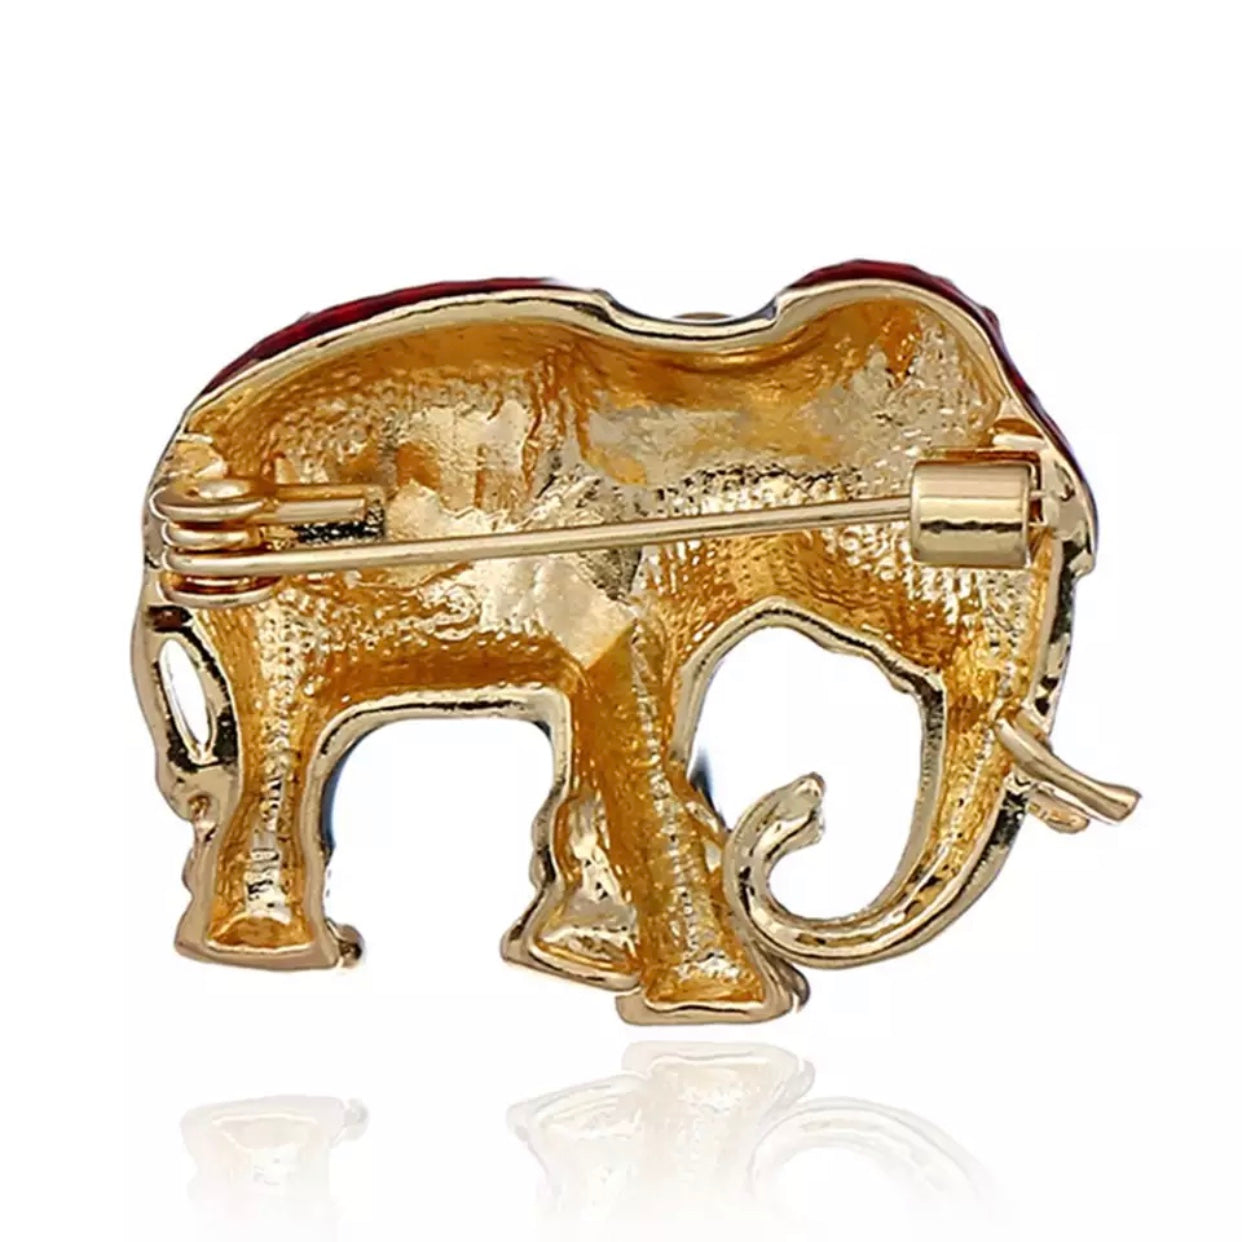 Enamel Red And Gray Elephant Brooch Pin for Women